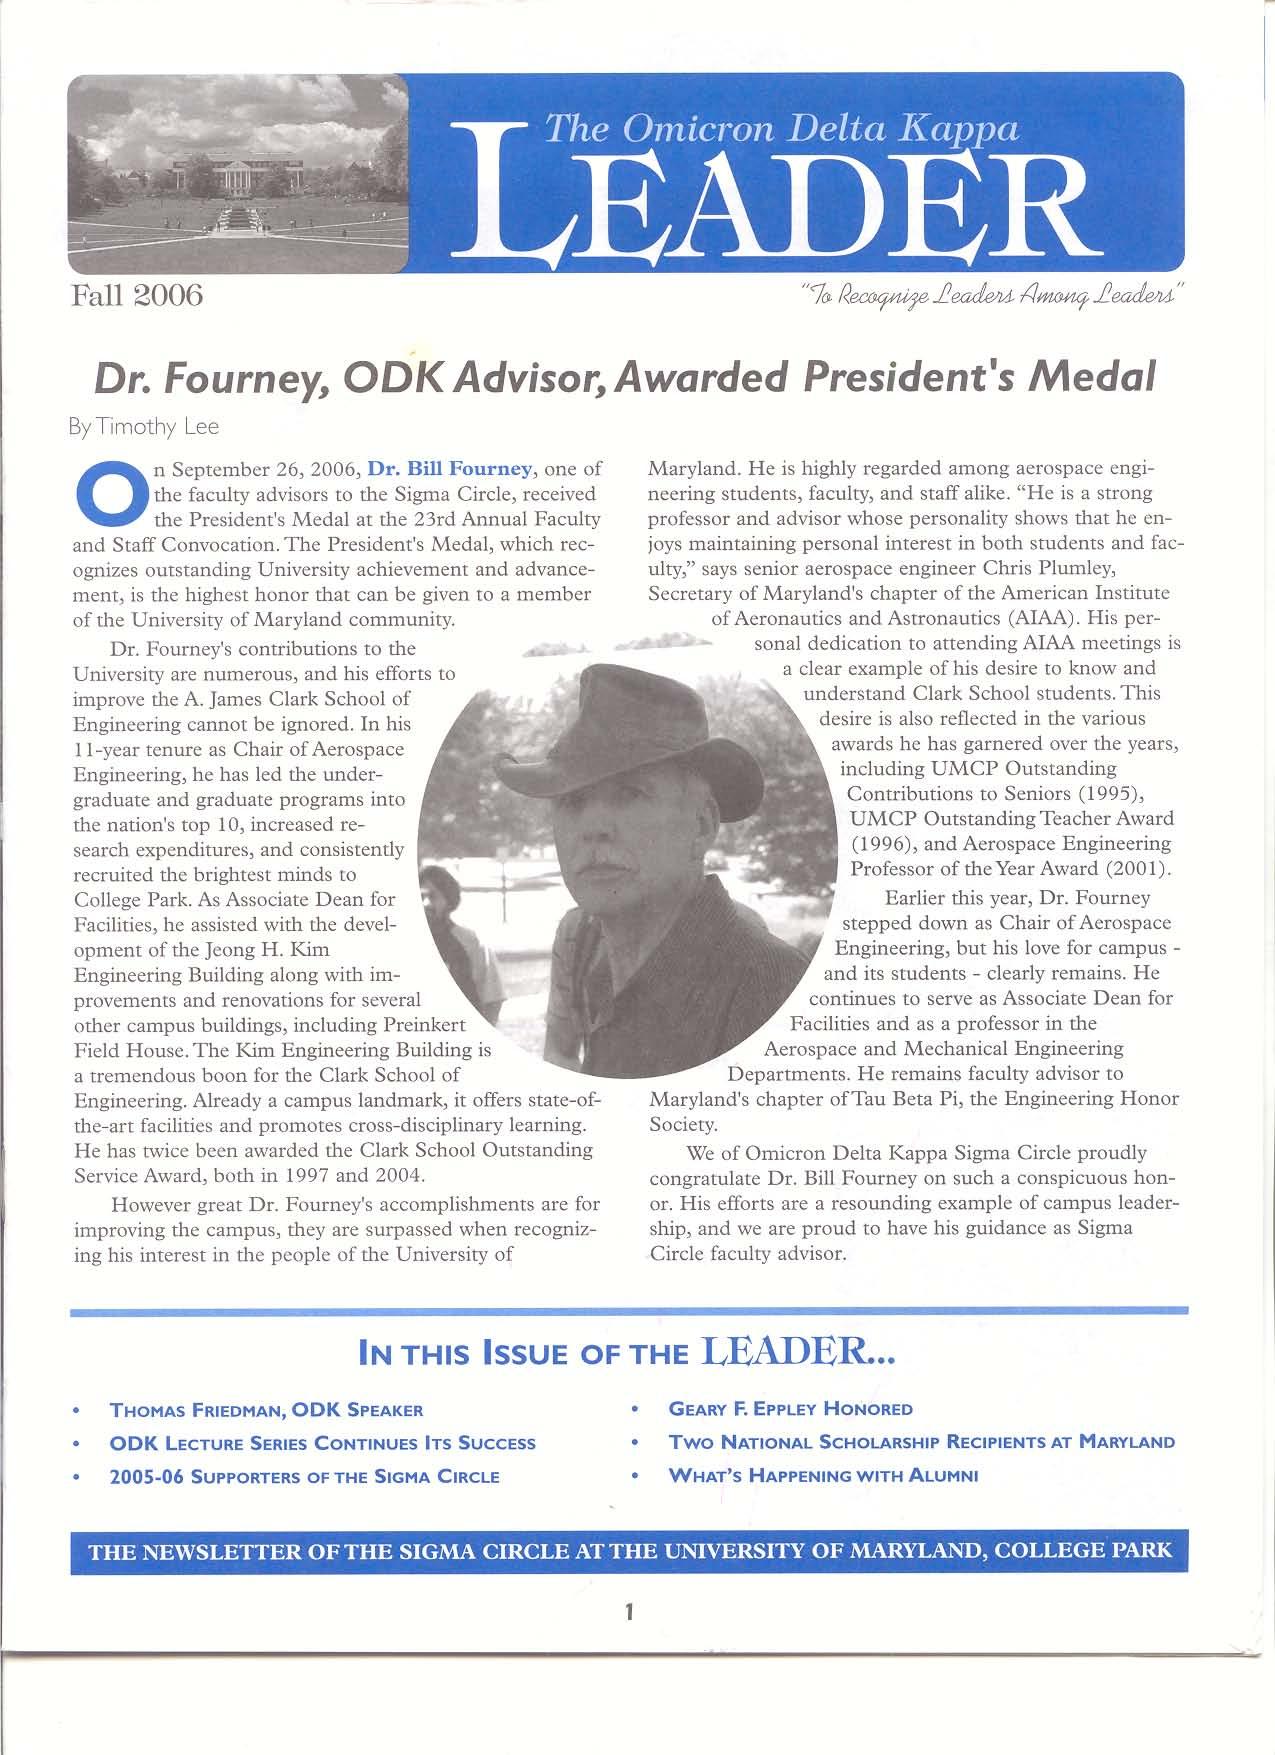 Front cover of Fall 2006 Newsletter